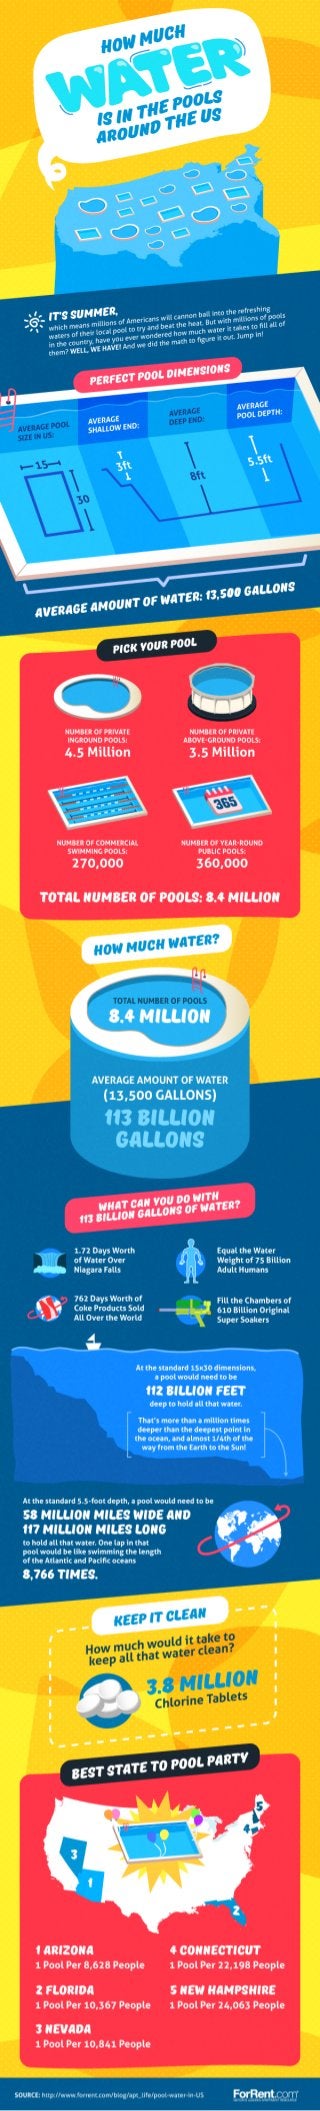 How Much Water Actually Is in Pools All Across the US?